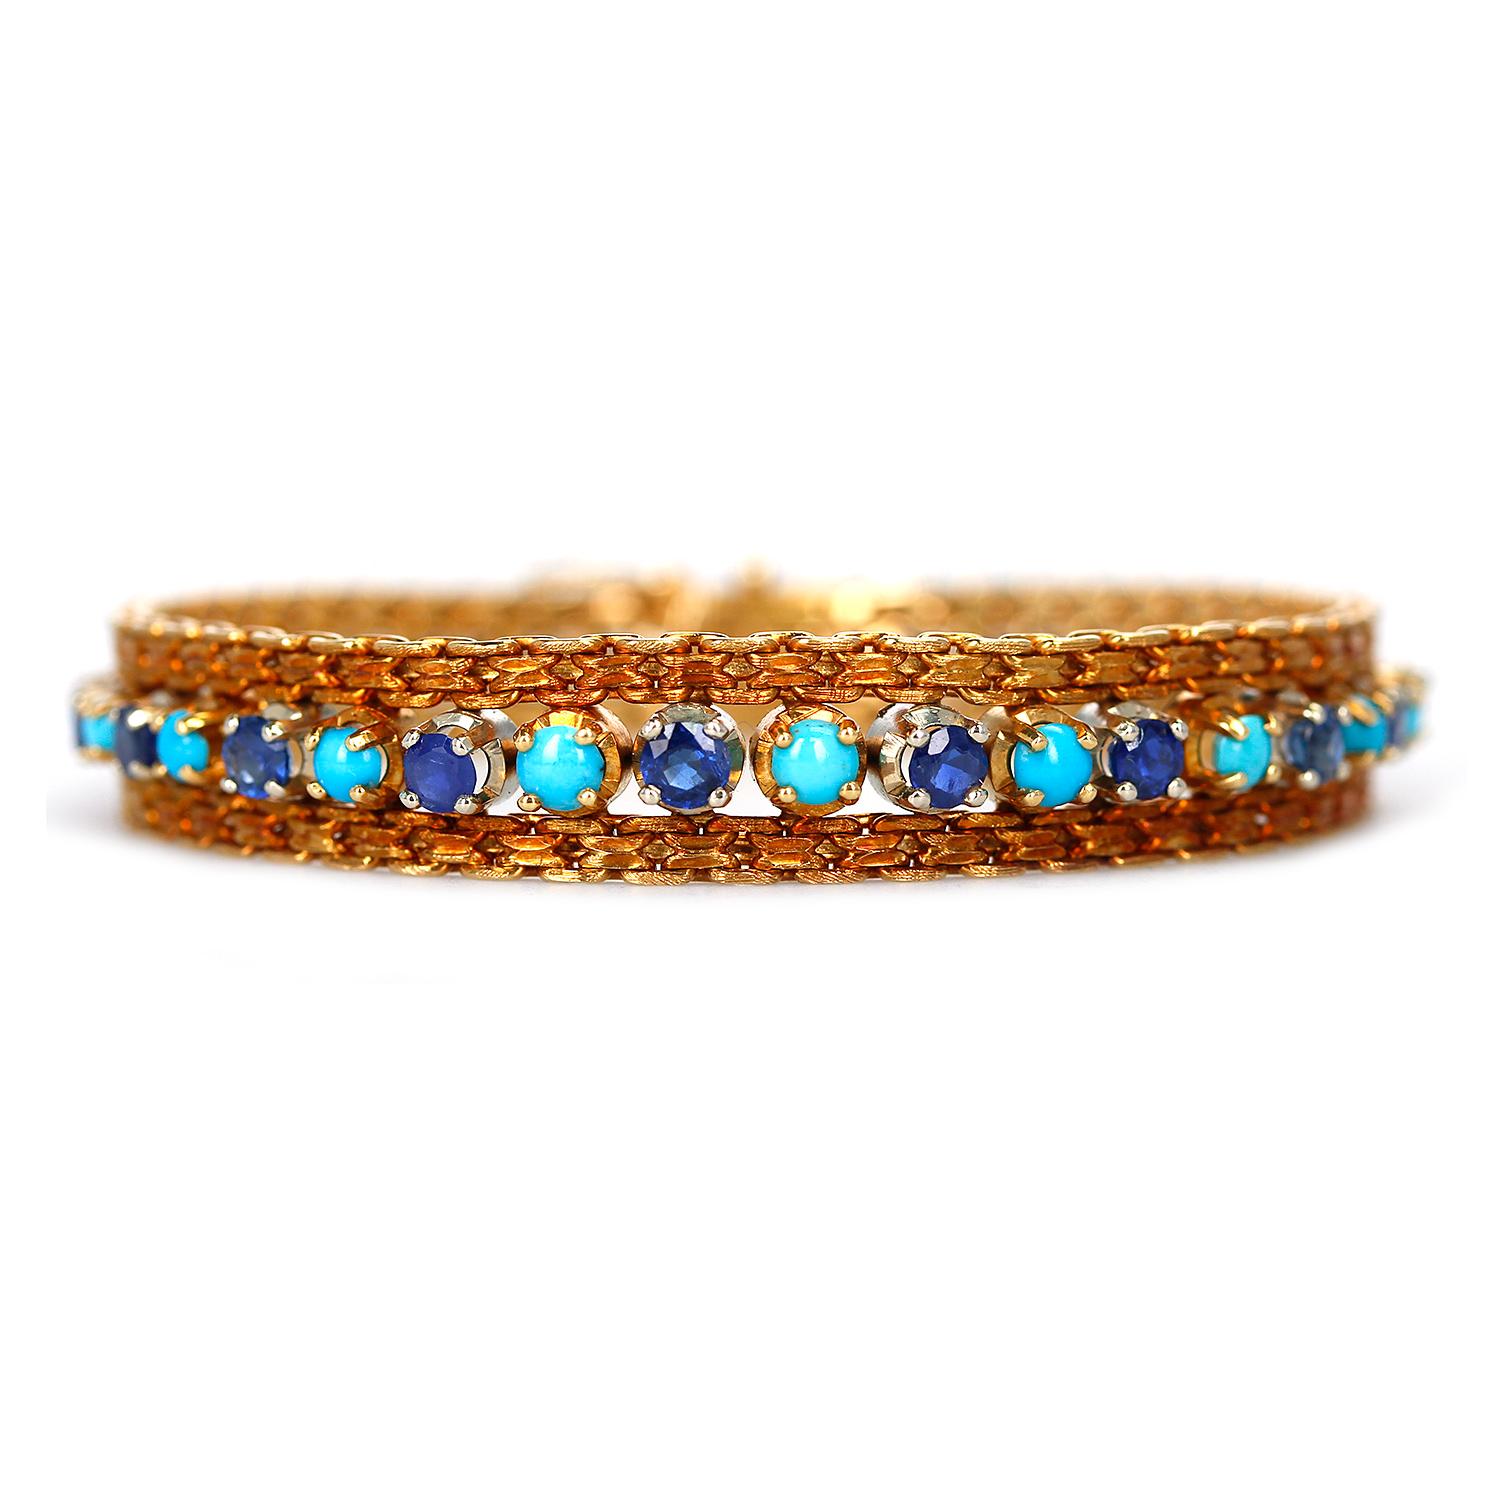 A Cartier Turquoise and Sapphire Bracelet made in 18 Karat Gold. The stones are increasing in size towards the middle of the bracelet. The bracelet has Turquoise Cabochons and Sapphire Cut Stones, all round. The length is 7.25